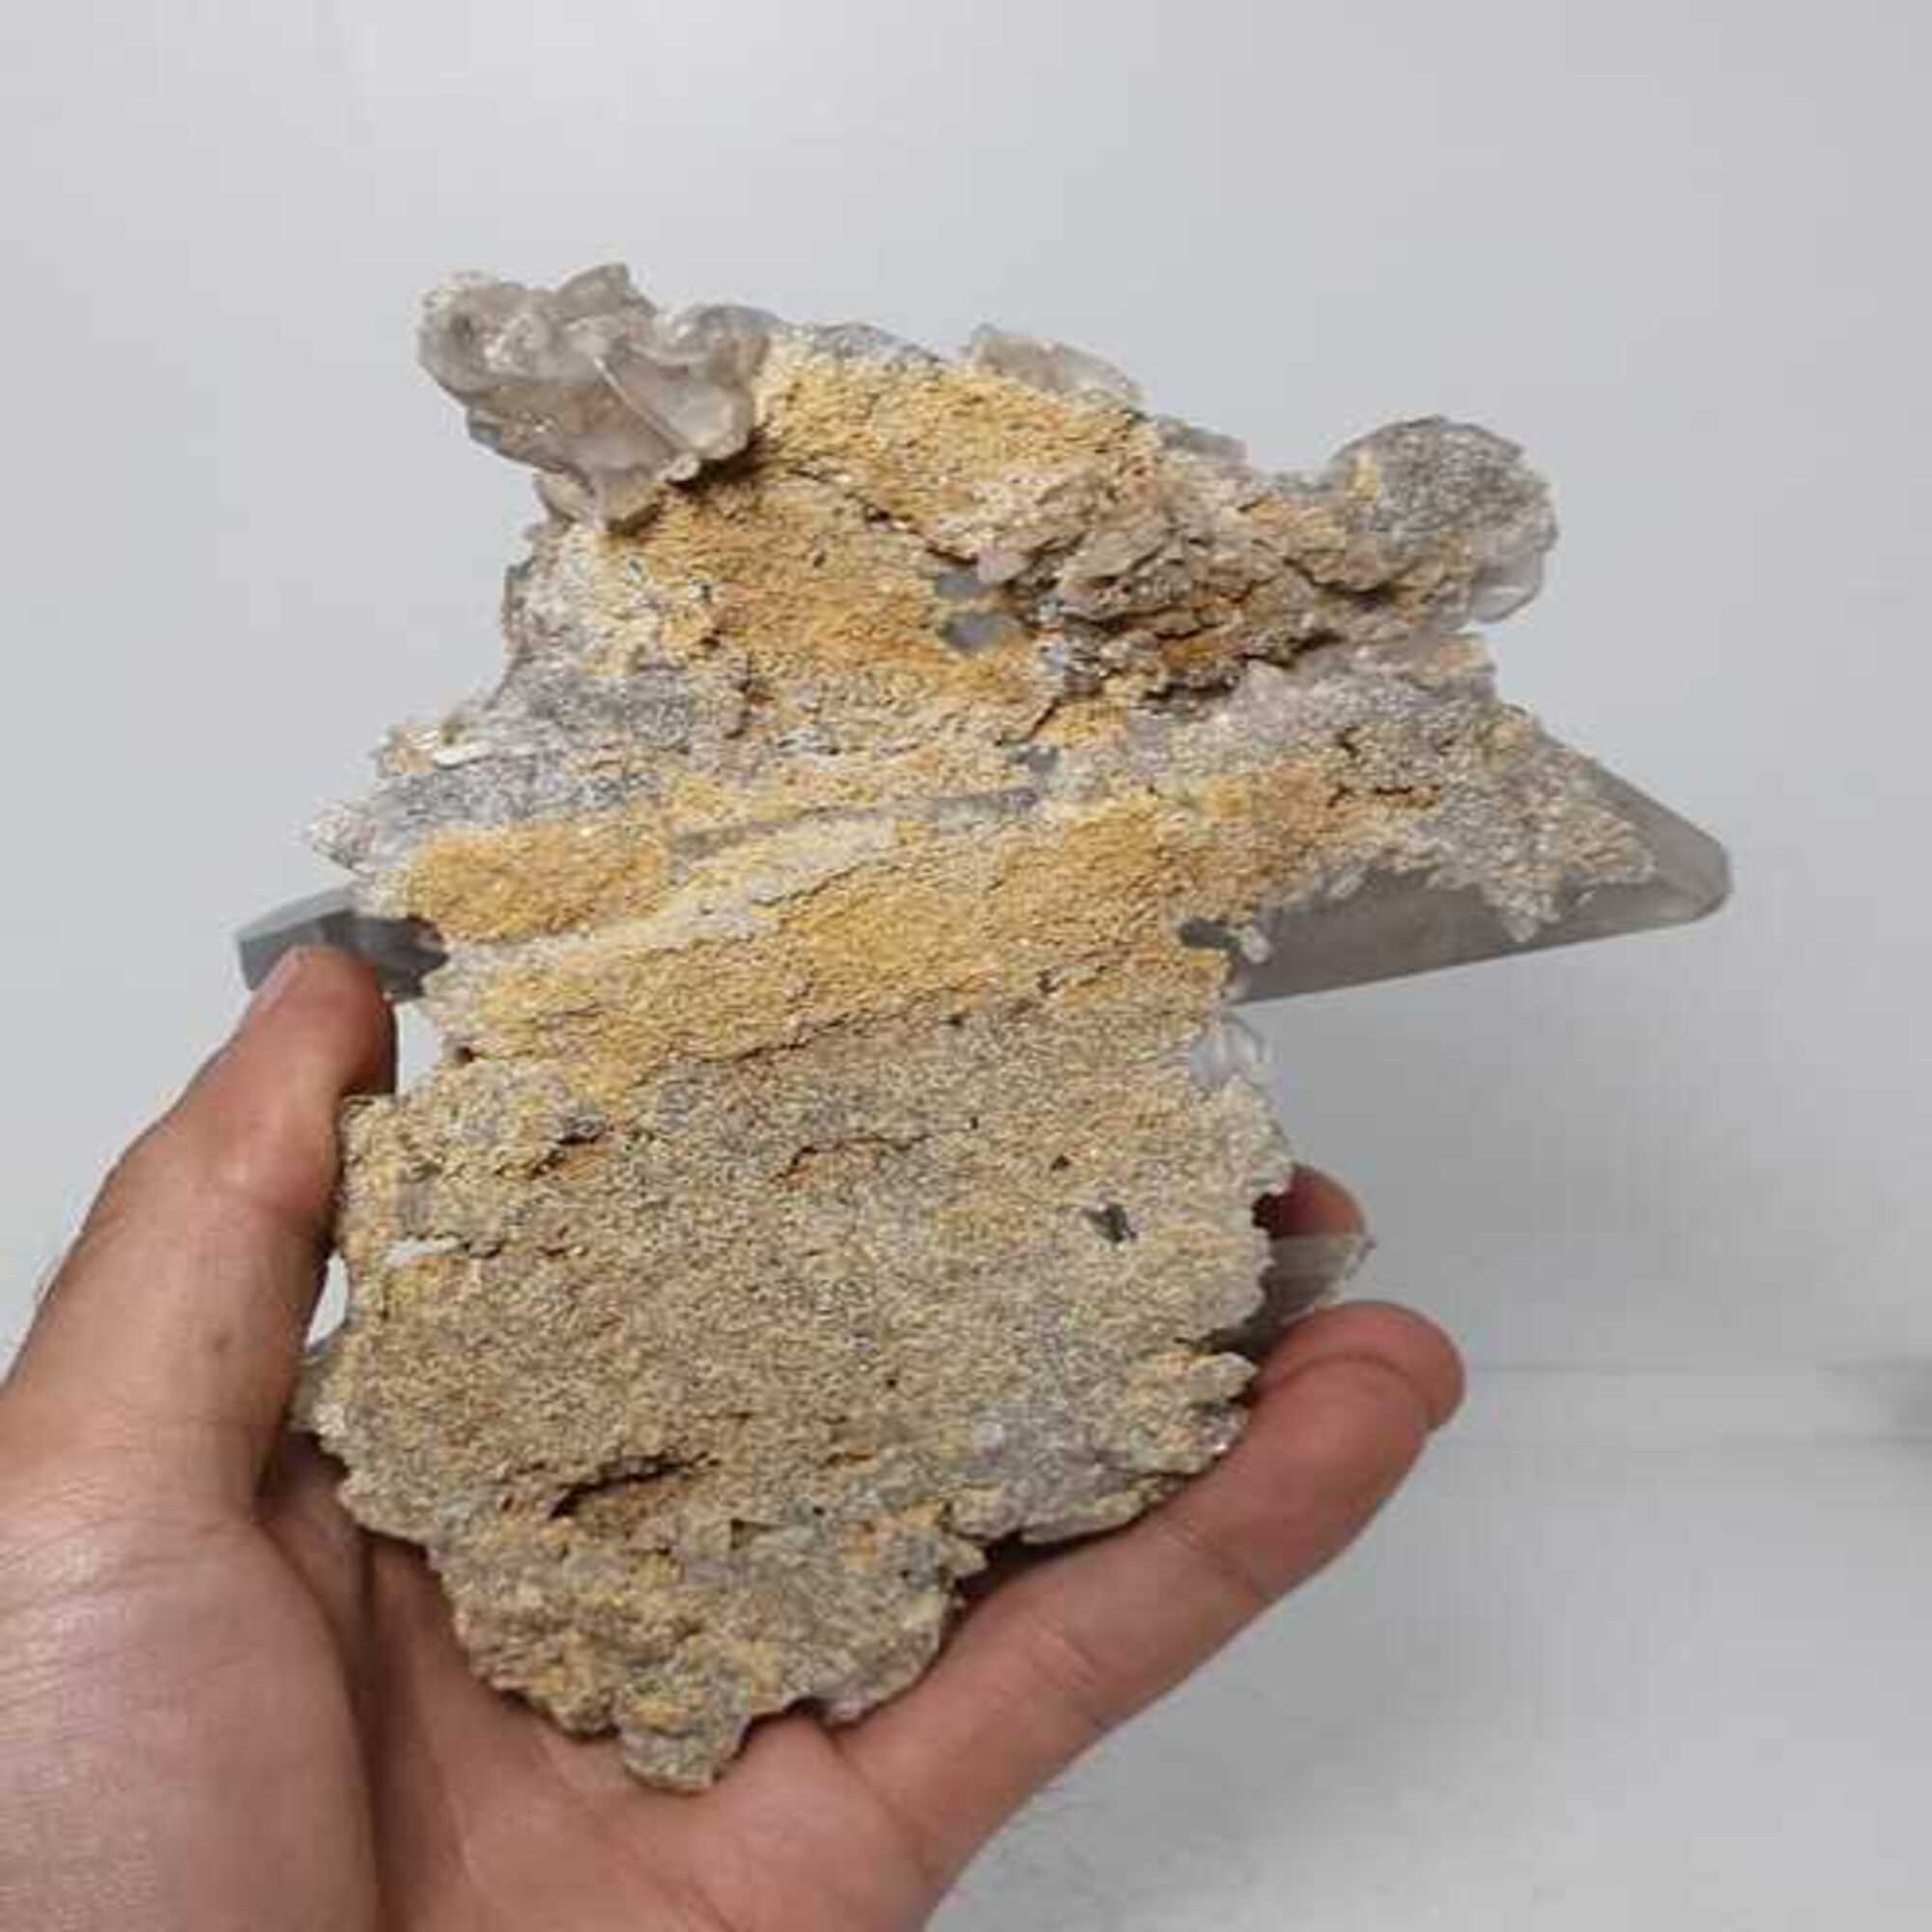 Gorgeous Robust Cluster Of Quartz With Interesting Inclusion